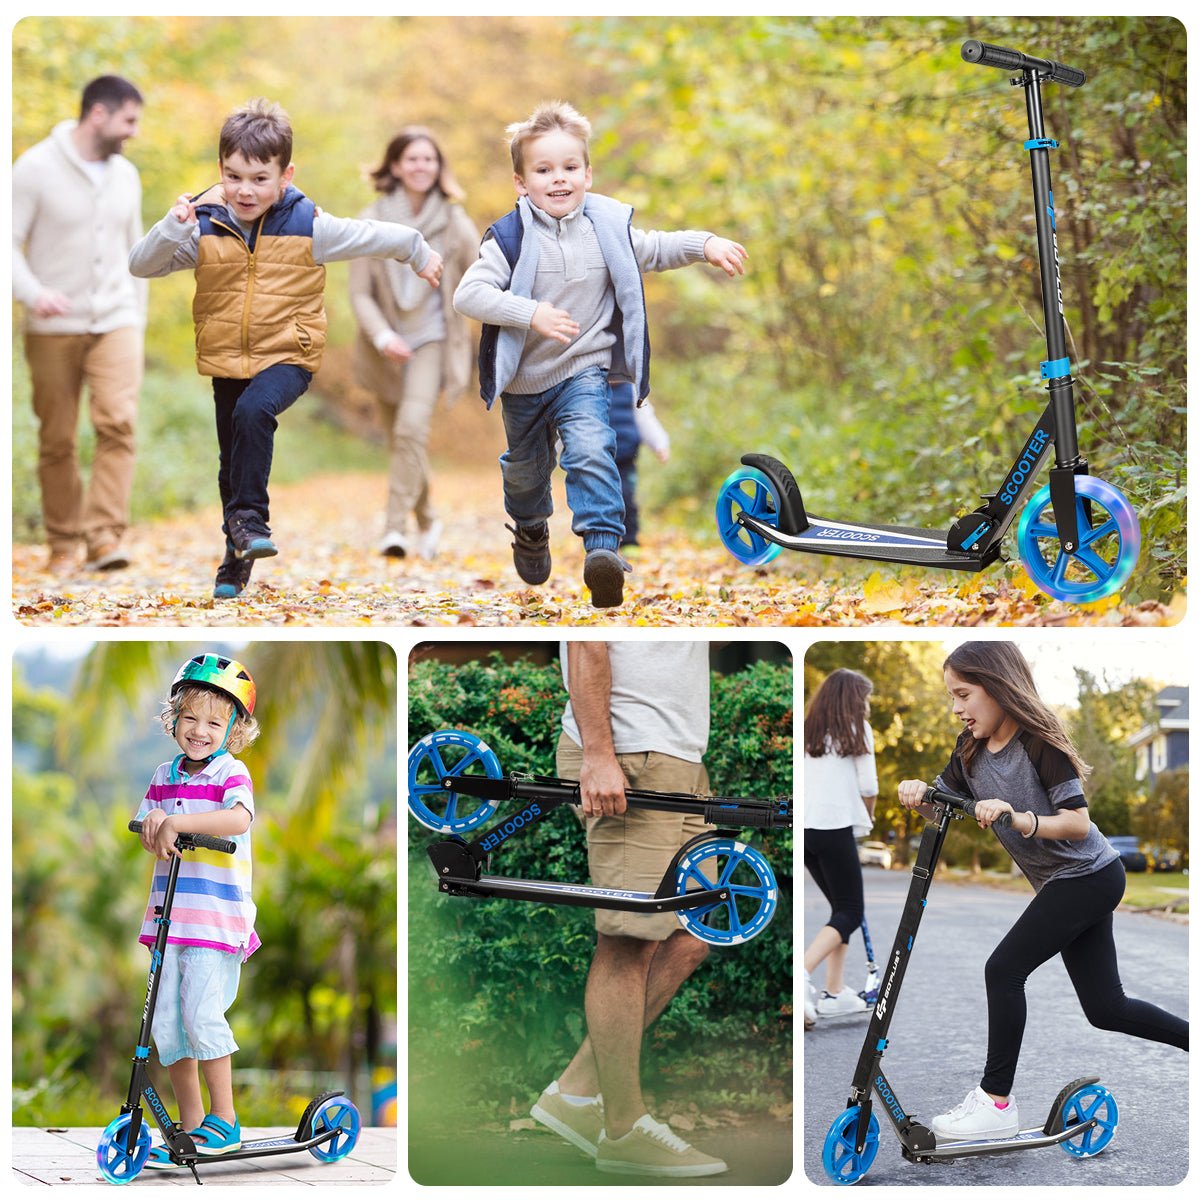 Blue Folding Scooter: Kick and Ride with Flashing LED Wheels